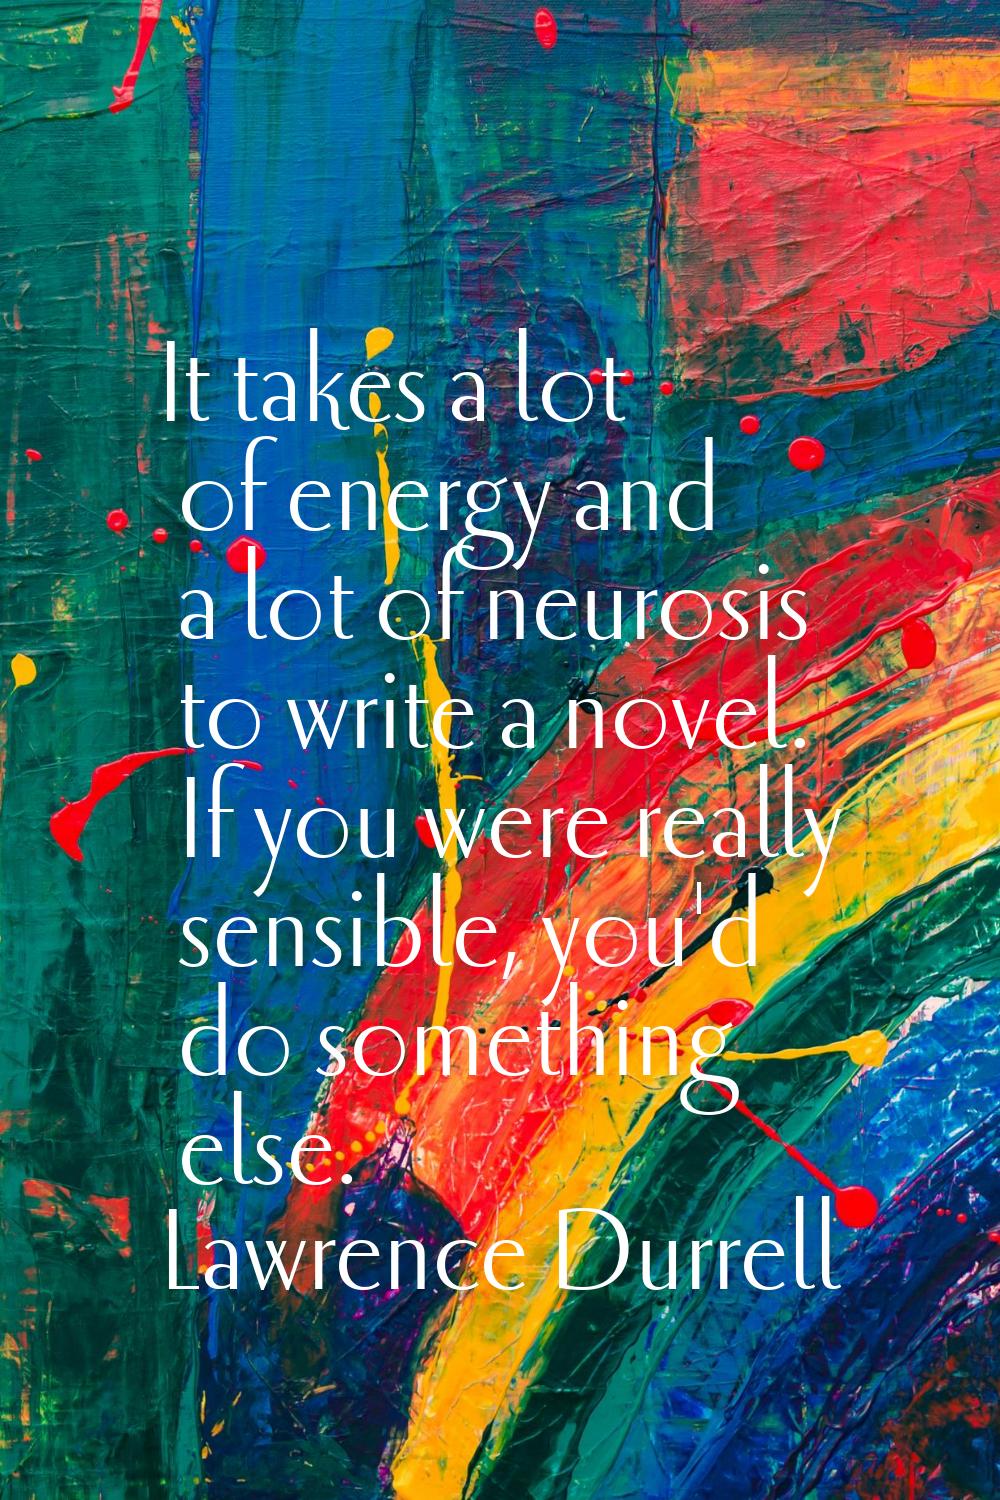 It takes a lot of energy and a lot of neurosis to write a novel. If you were really sensible, you'd